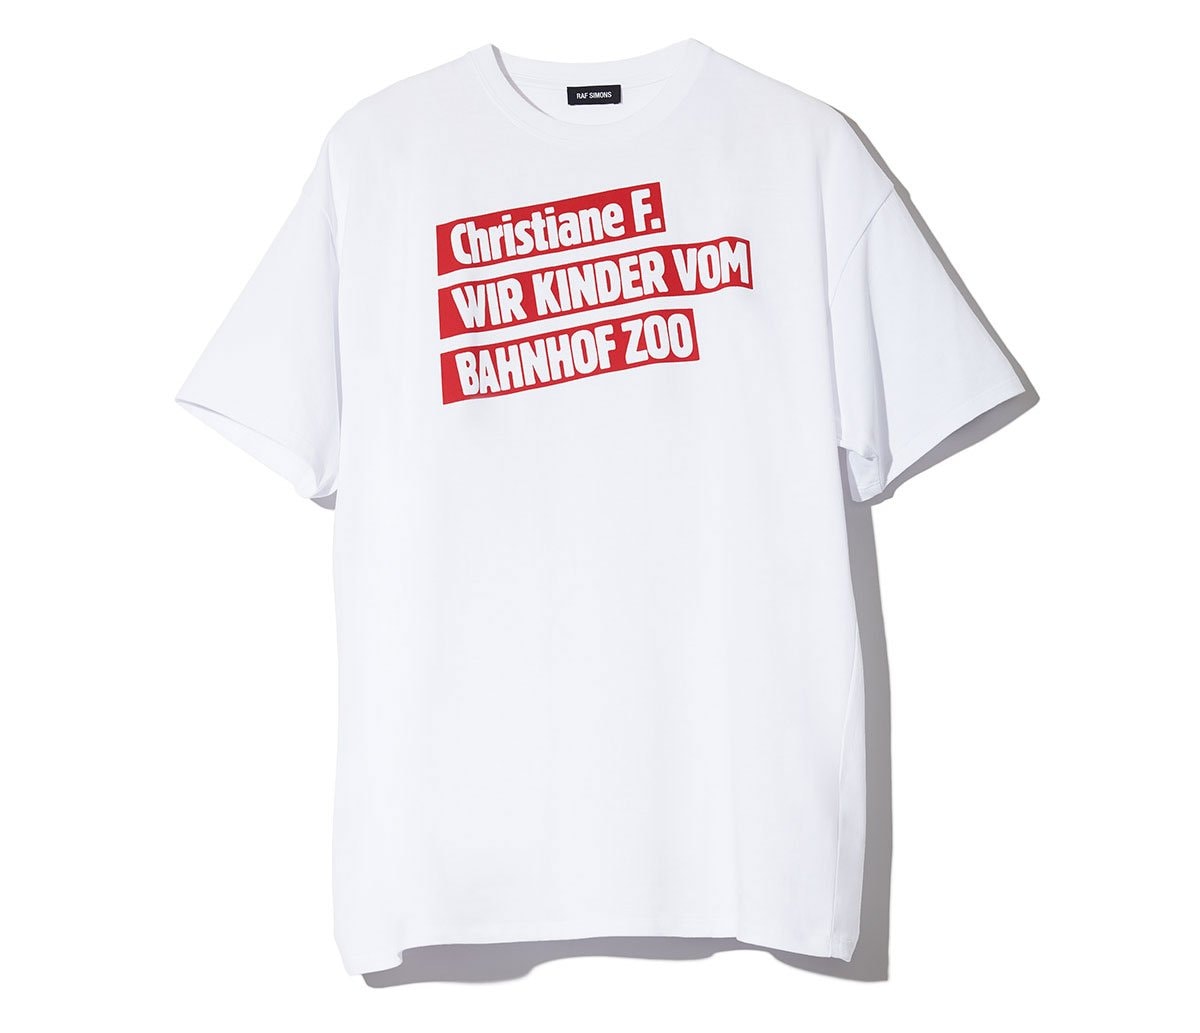 Raf Simons Christiane F. wir Kinder vom Bahnhof Zoo Collaboration drop collection fall winter 2018 release limited commemorative We Children from Bahnhof Zoo